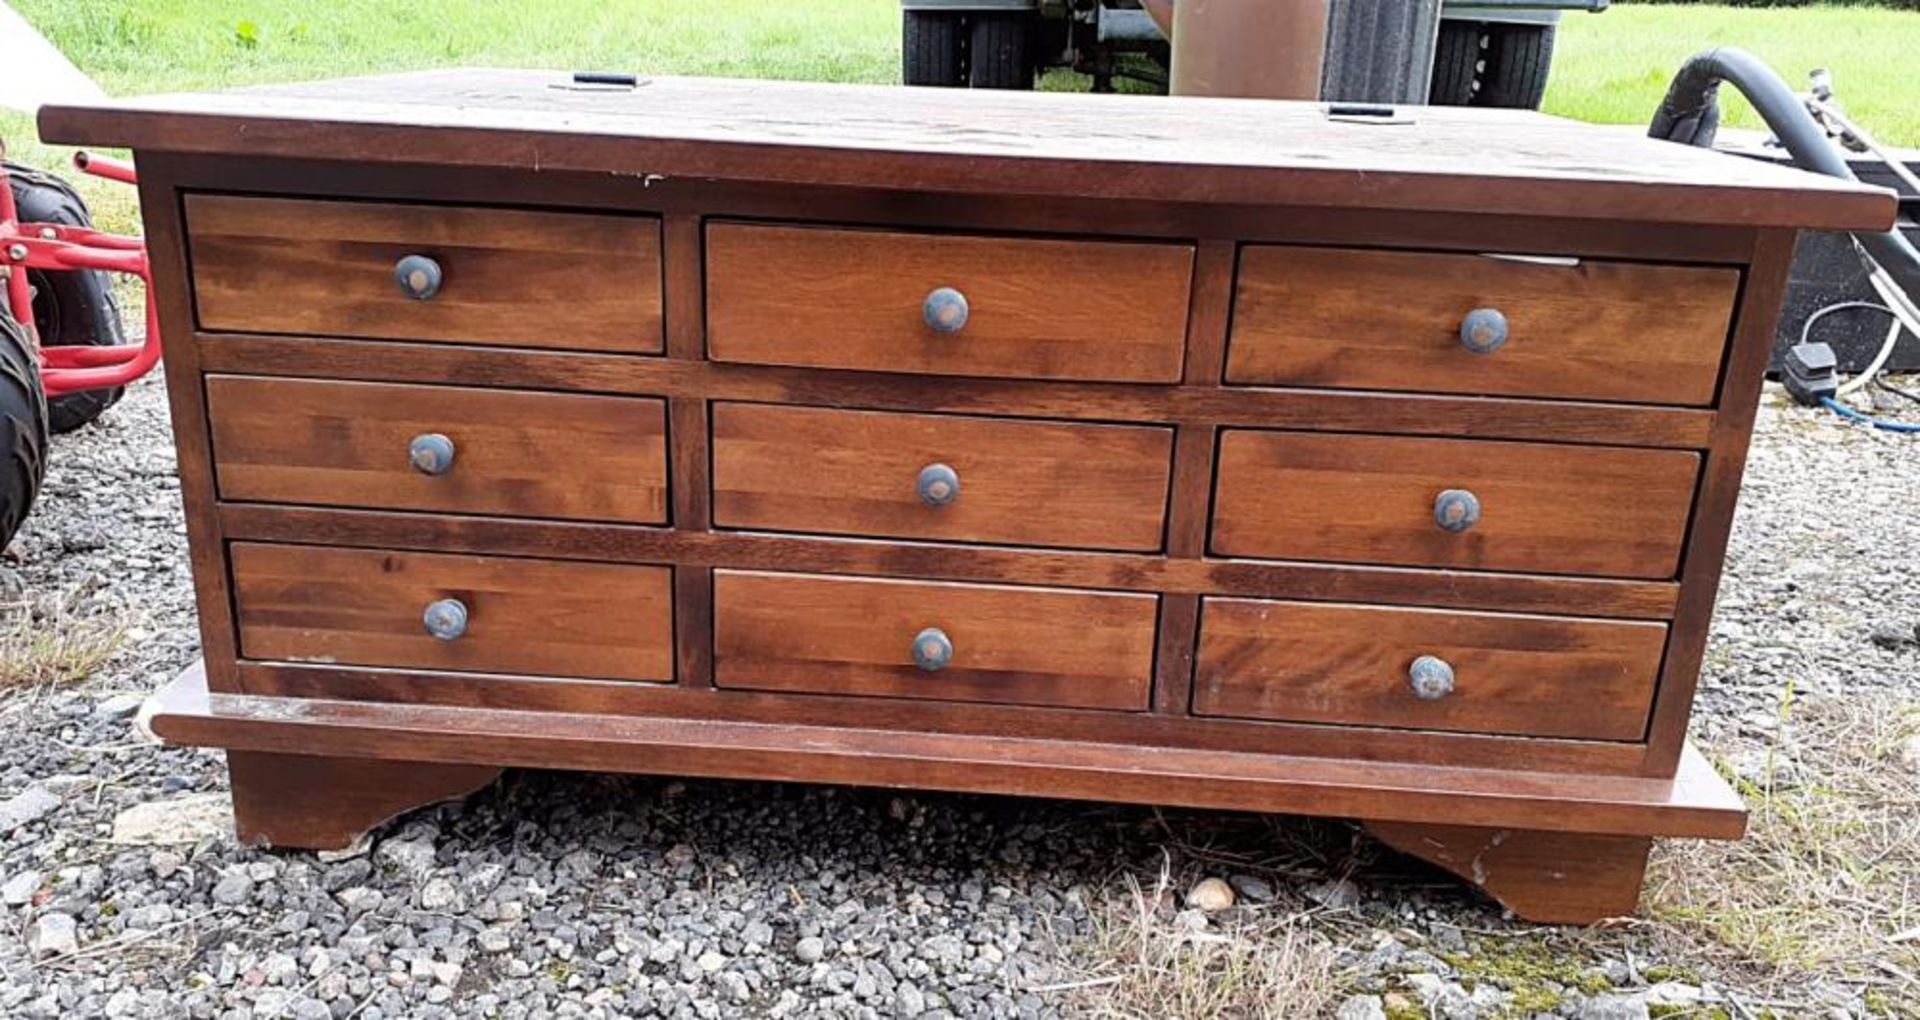 1 x Timber Linen / Bedroom Chest With 9 x Drawers - See Pictures For Condition - Dimensions: 90cm x